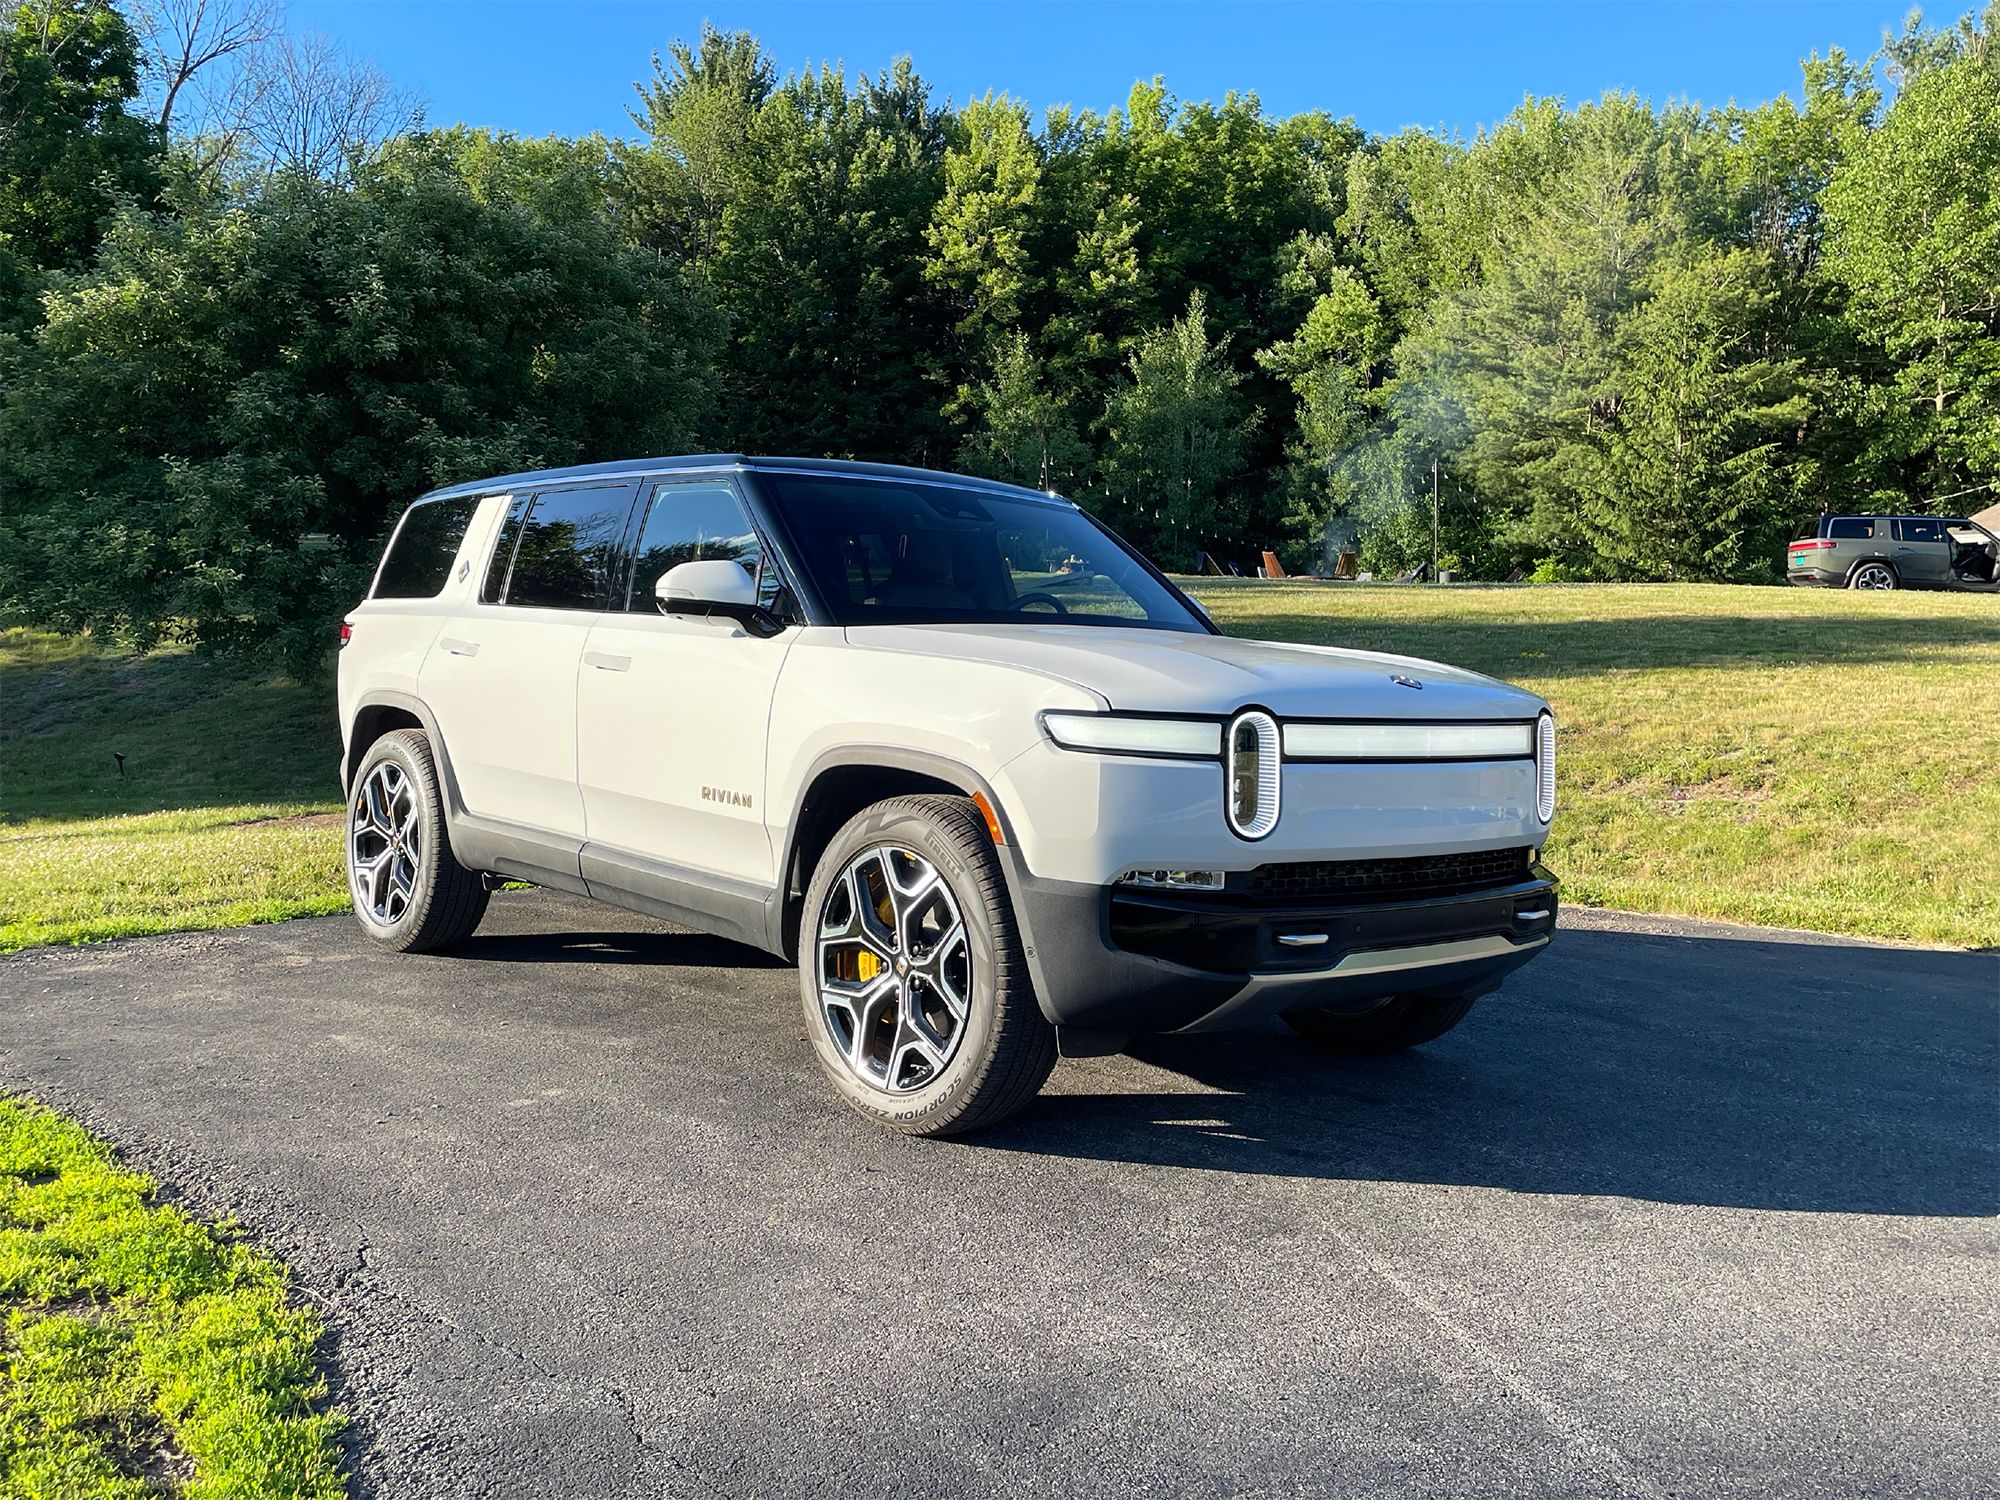 Should You Accept an Offer For a Rivian R1S Pre-Order? Weighing the Pros and Cons